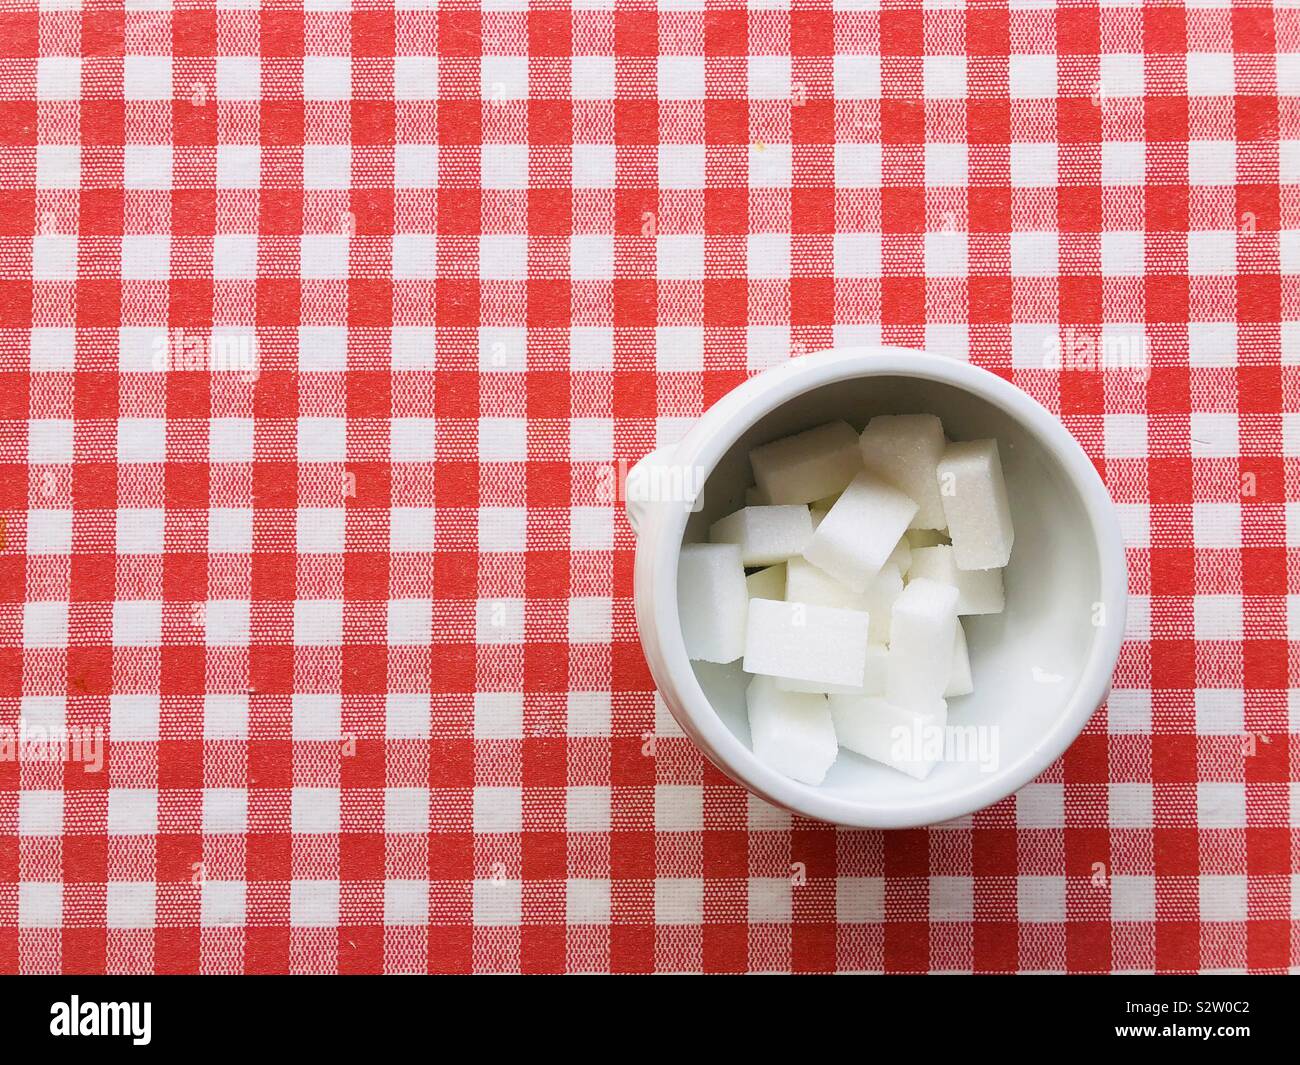 Bowl of sugar lumps on red and white background Stock Photo